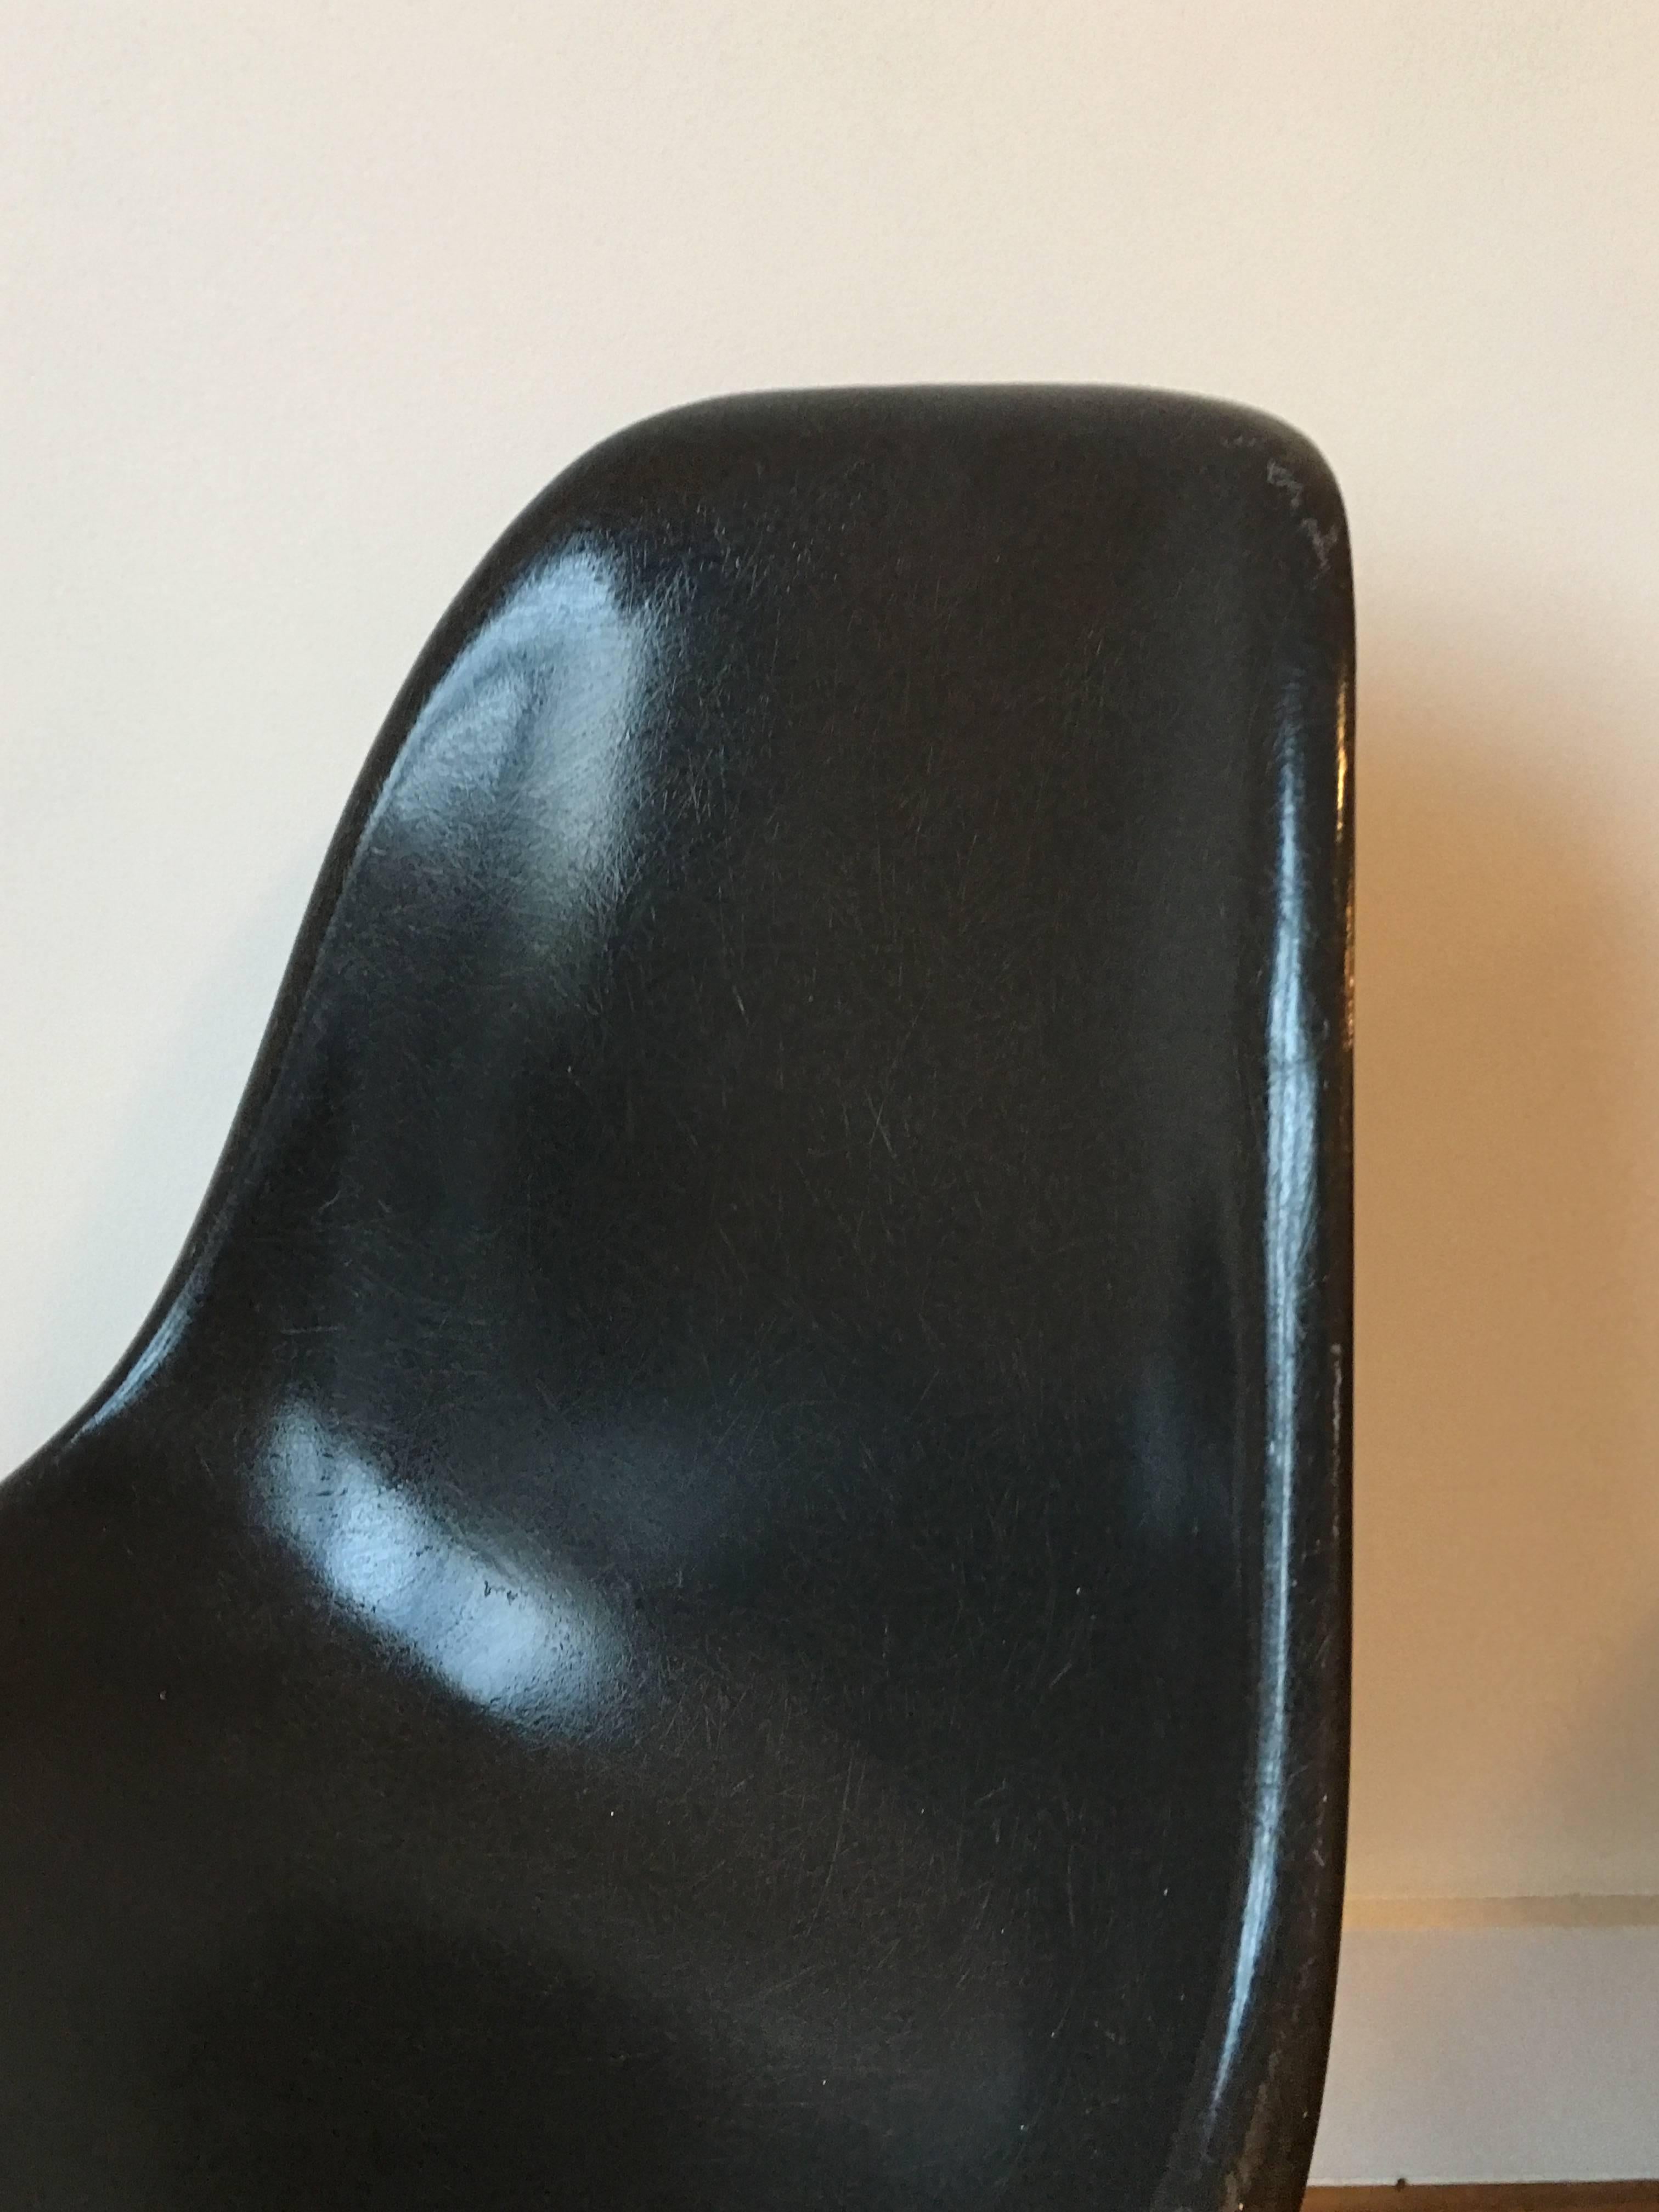 Ten Herman Miller Eames DSW dining chairs in rare color: Black. This was a special order color and it is rare to save a set this big. New bases available in maple, or walnut legs with zinc plated or black metal frames. Shown with black frame and